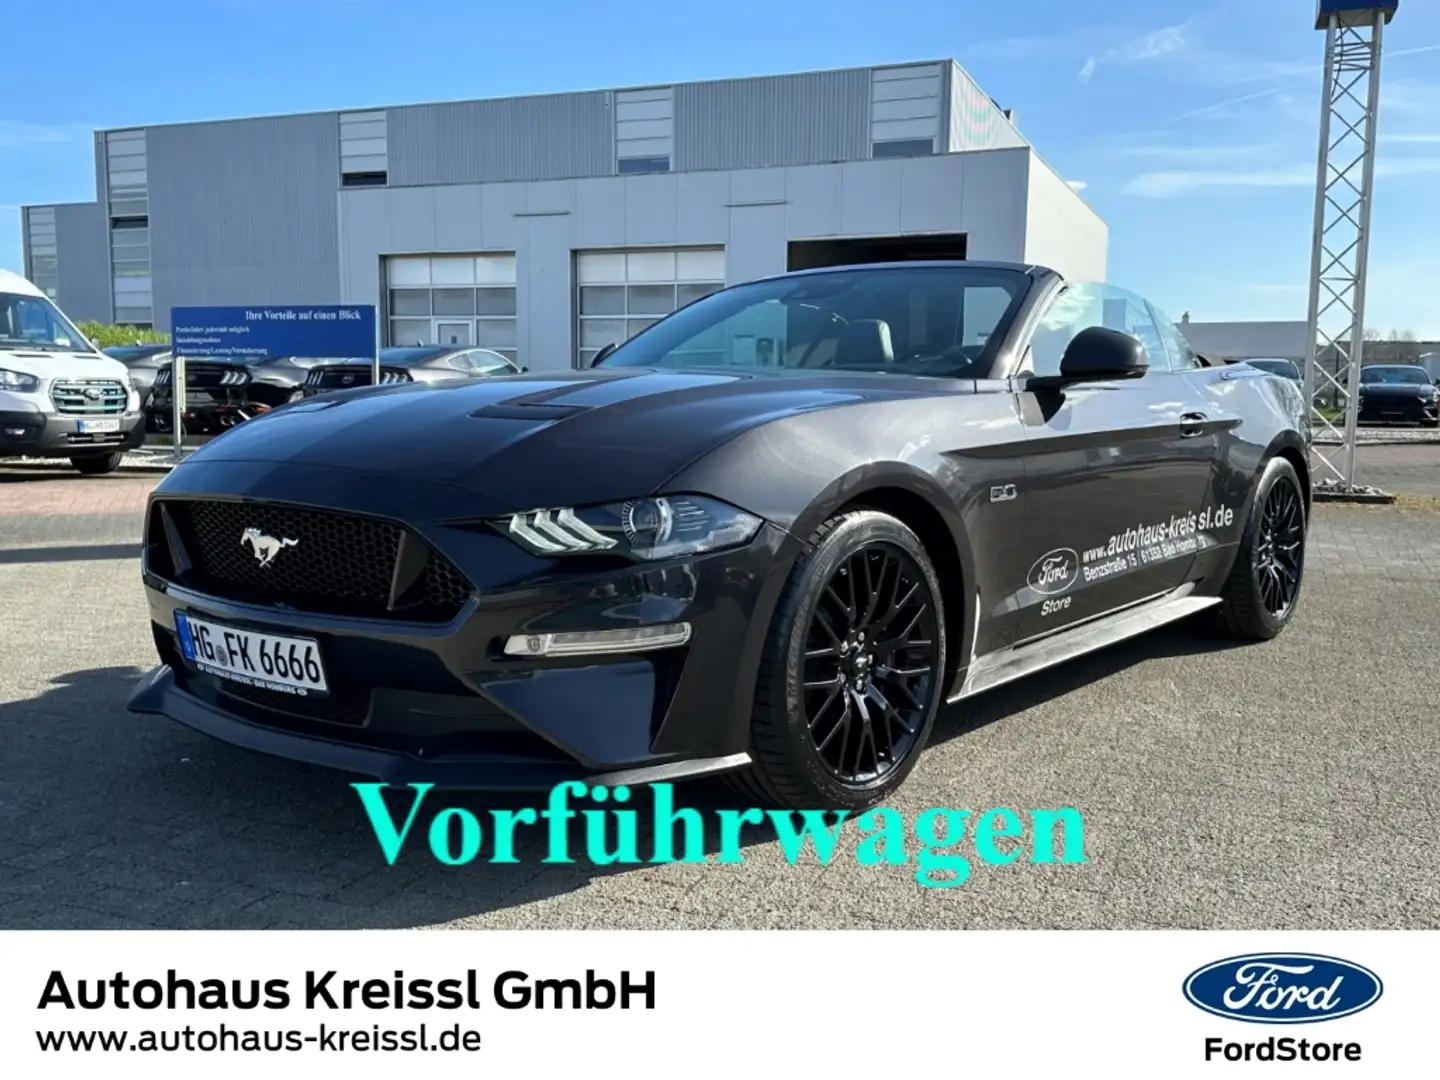 Ford Mustang Convertible GT 5.0 V8 MagneRide siva - 1